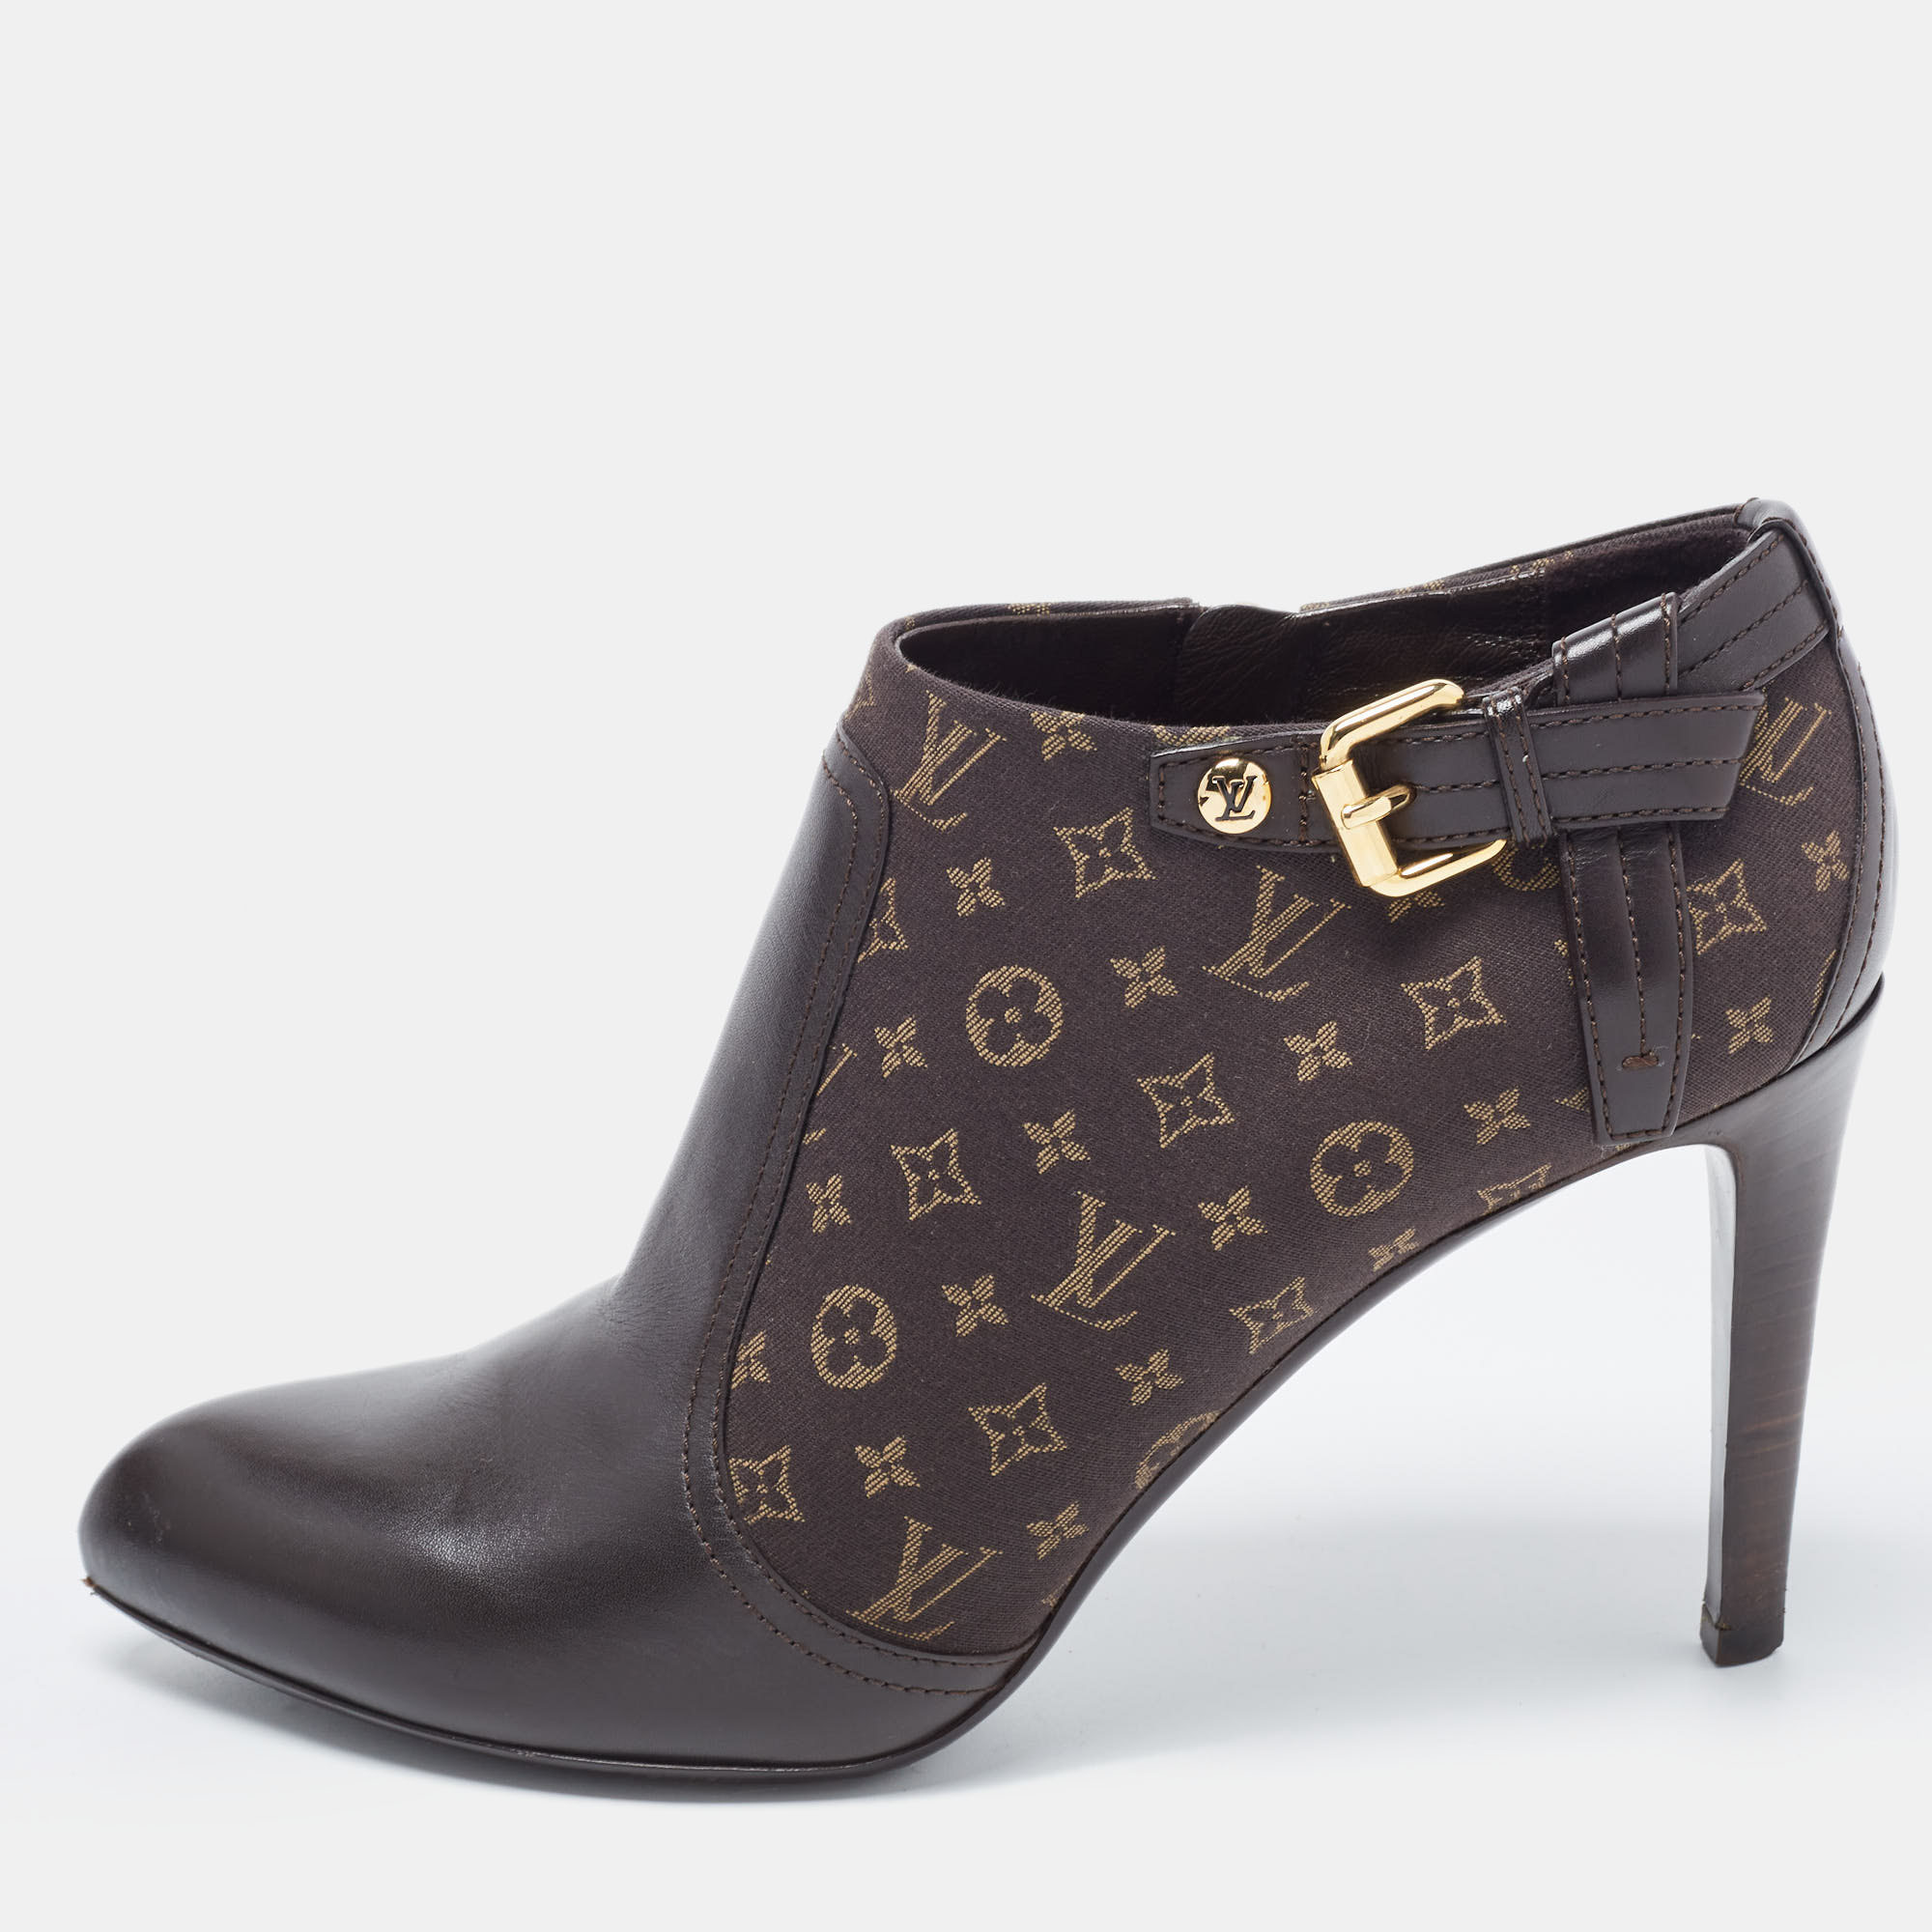 LOUIS VUITTON Monogram Stretch Fabric Silhouette Ankle Boots 39.5